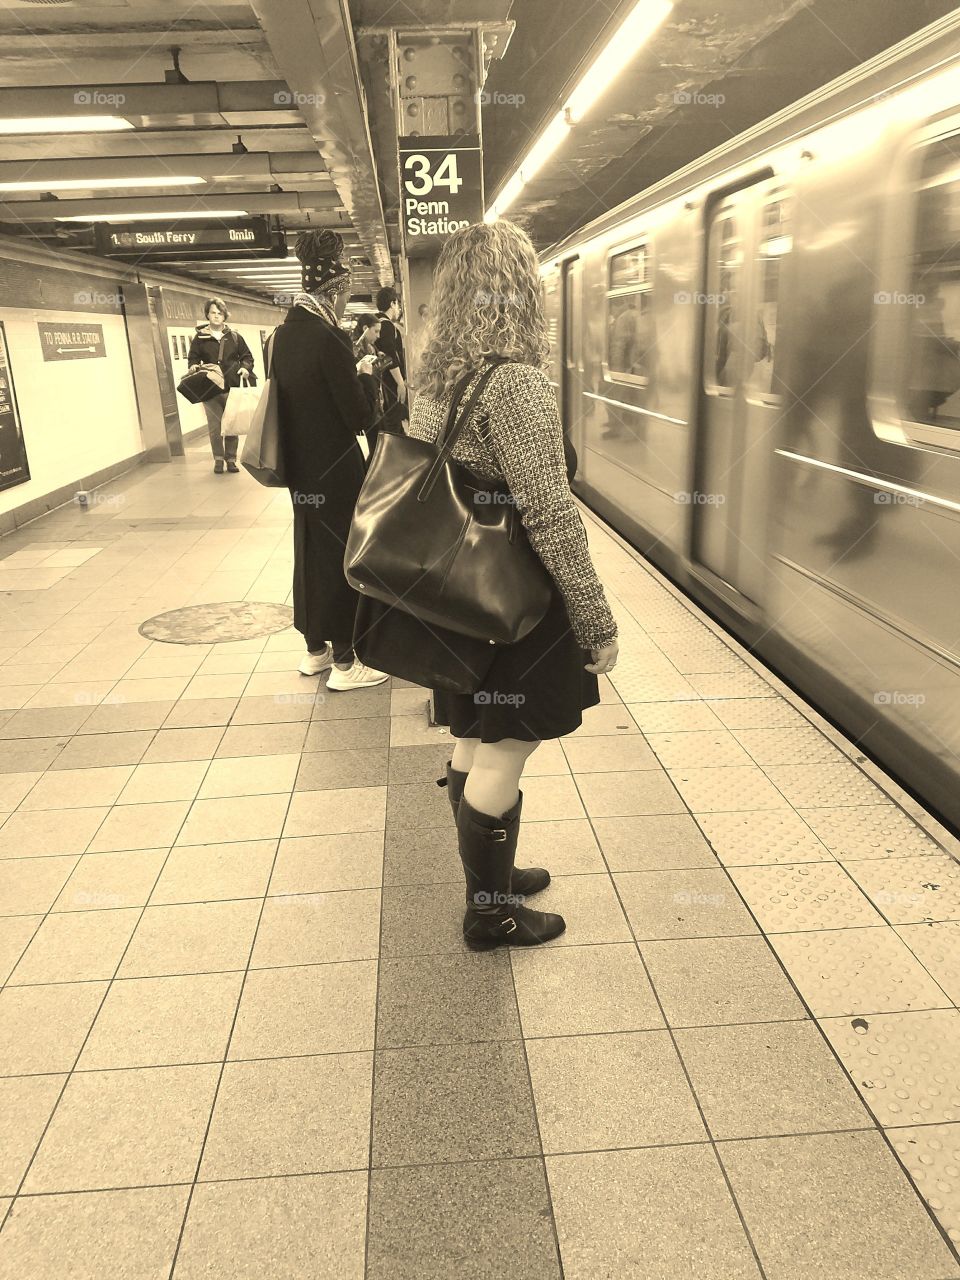 Girl Waiting on Subway Platform in NYC for Train. Sepia Filter. Captured on Android Phone - Galaxy S7. May 2017